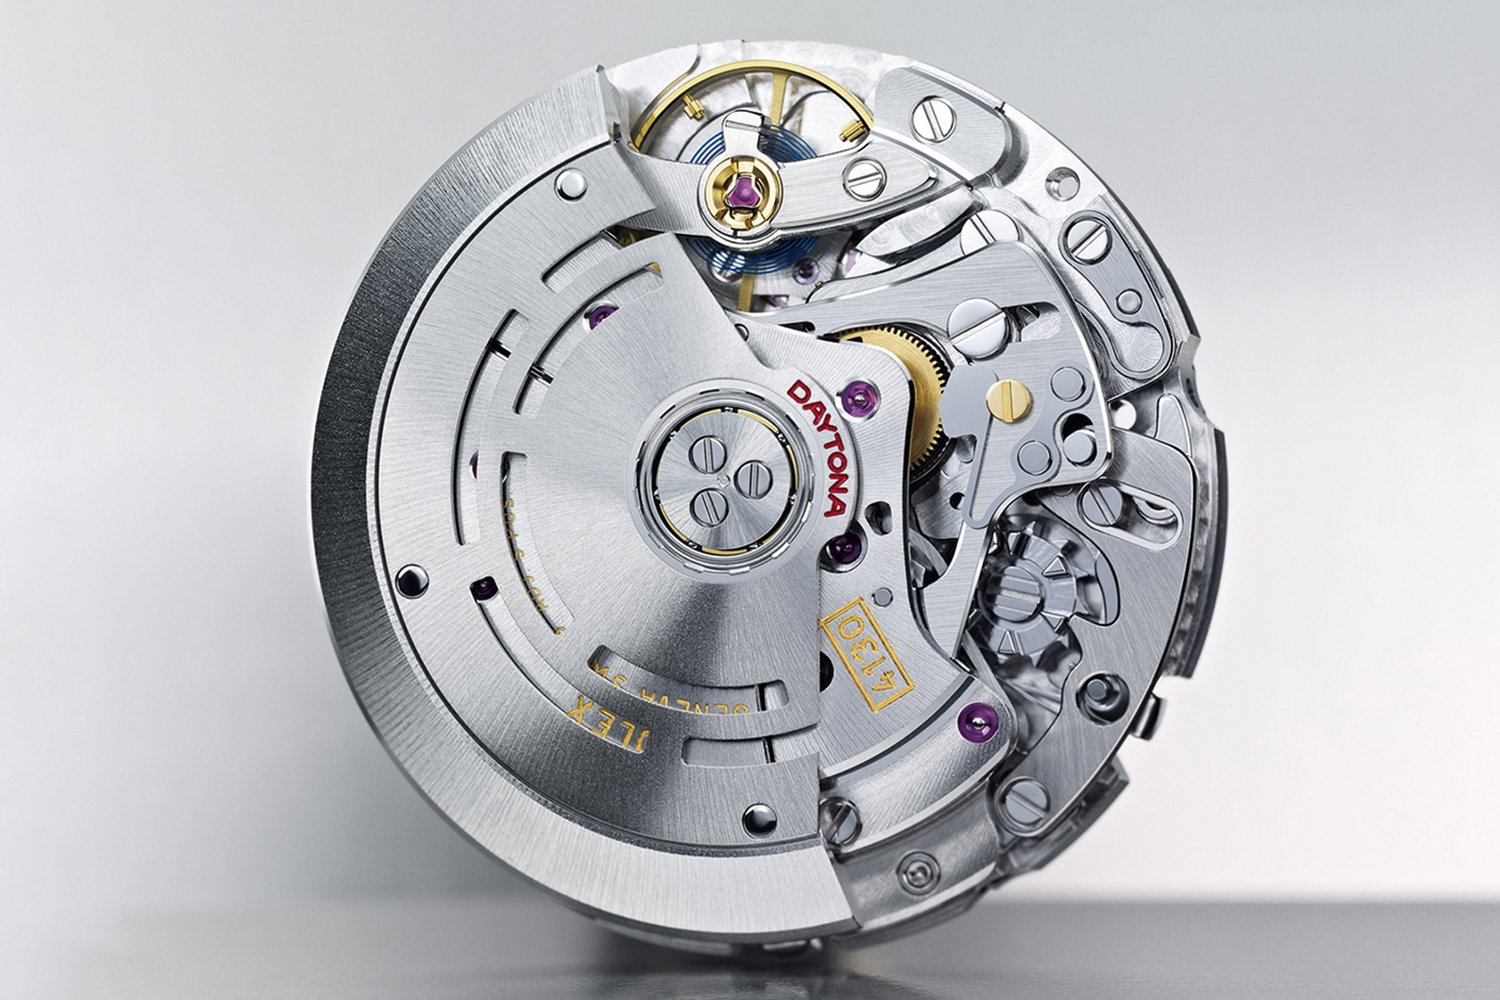 The caliber 4130. Less parts and easier to service. (Image: Rolex)